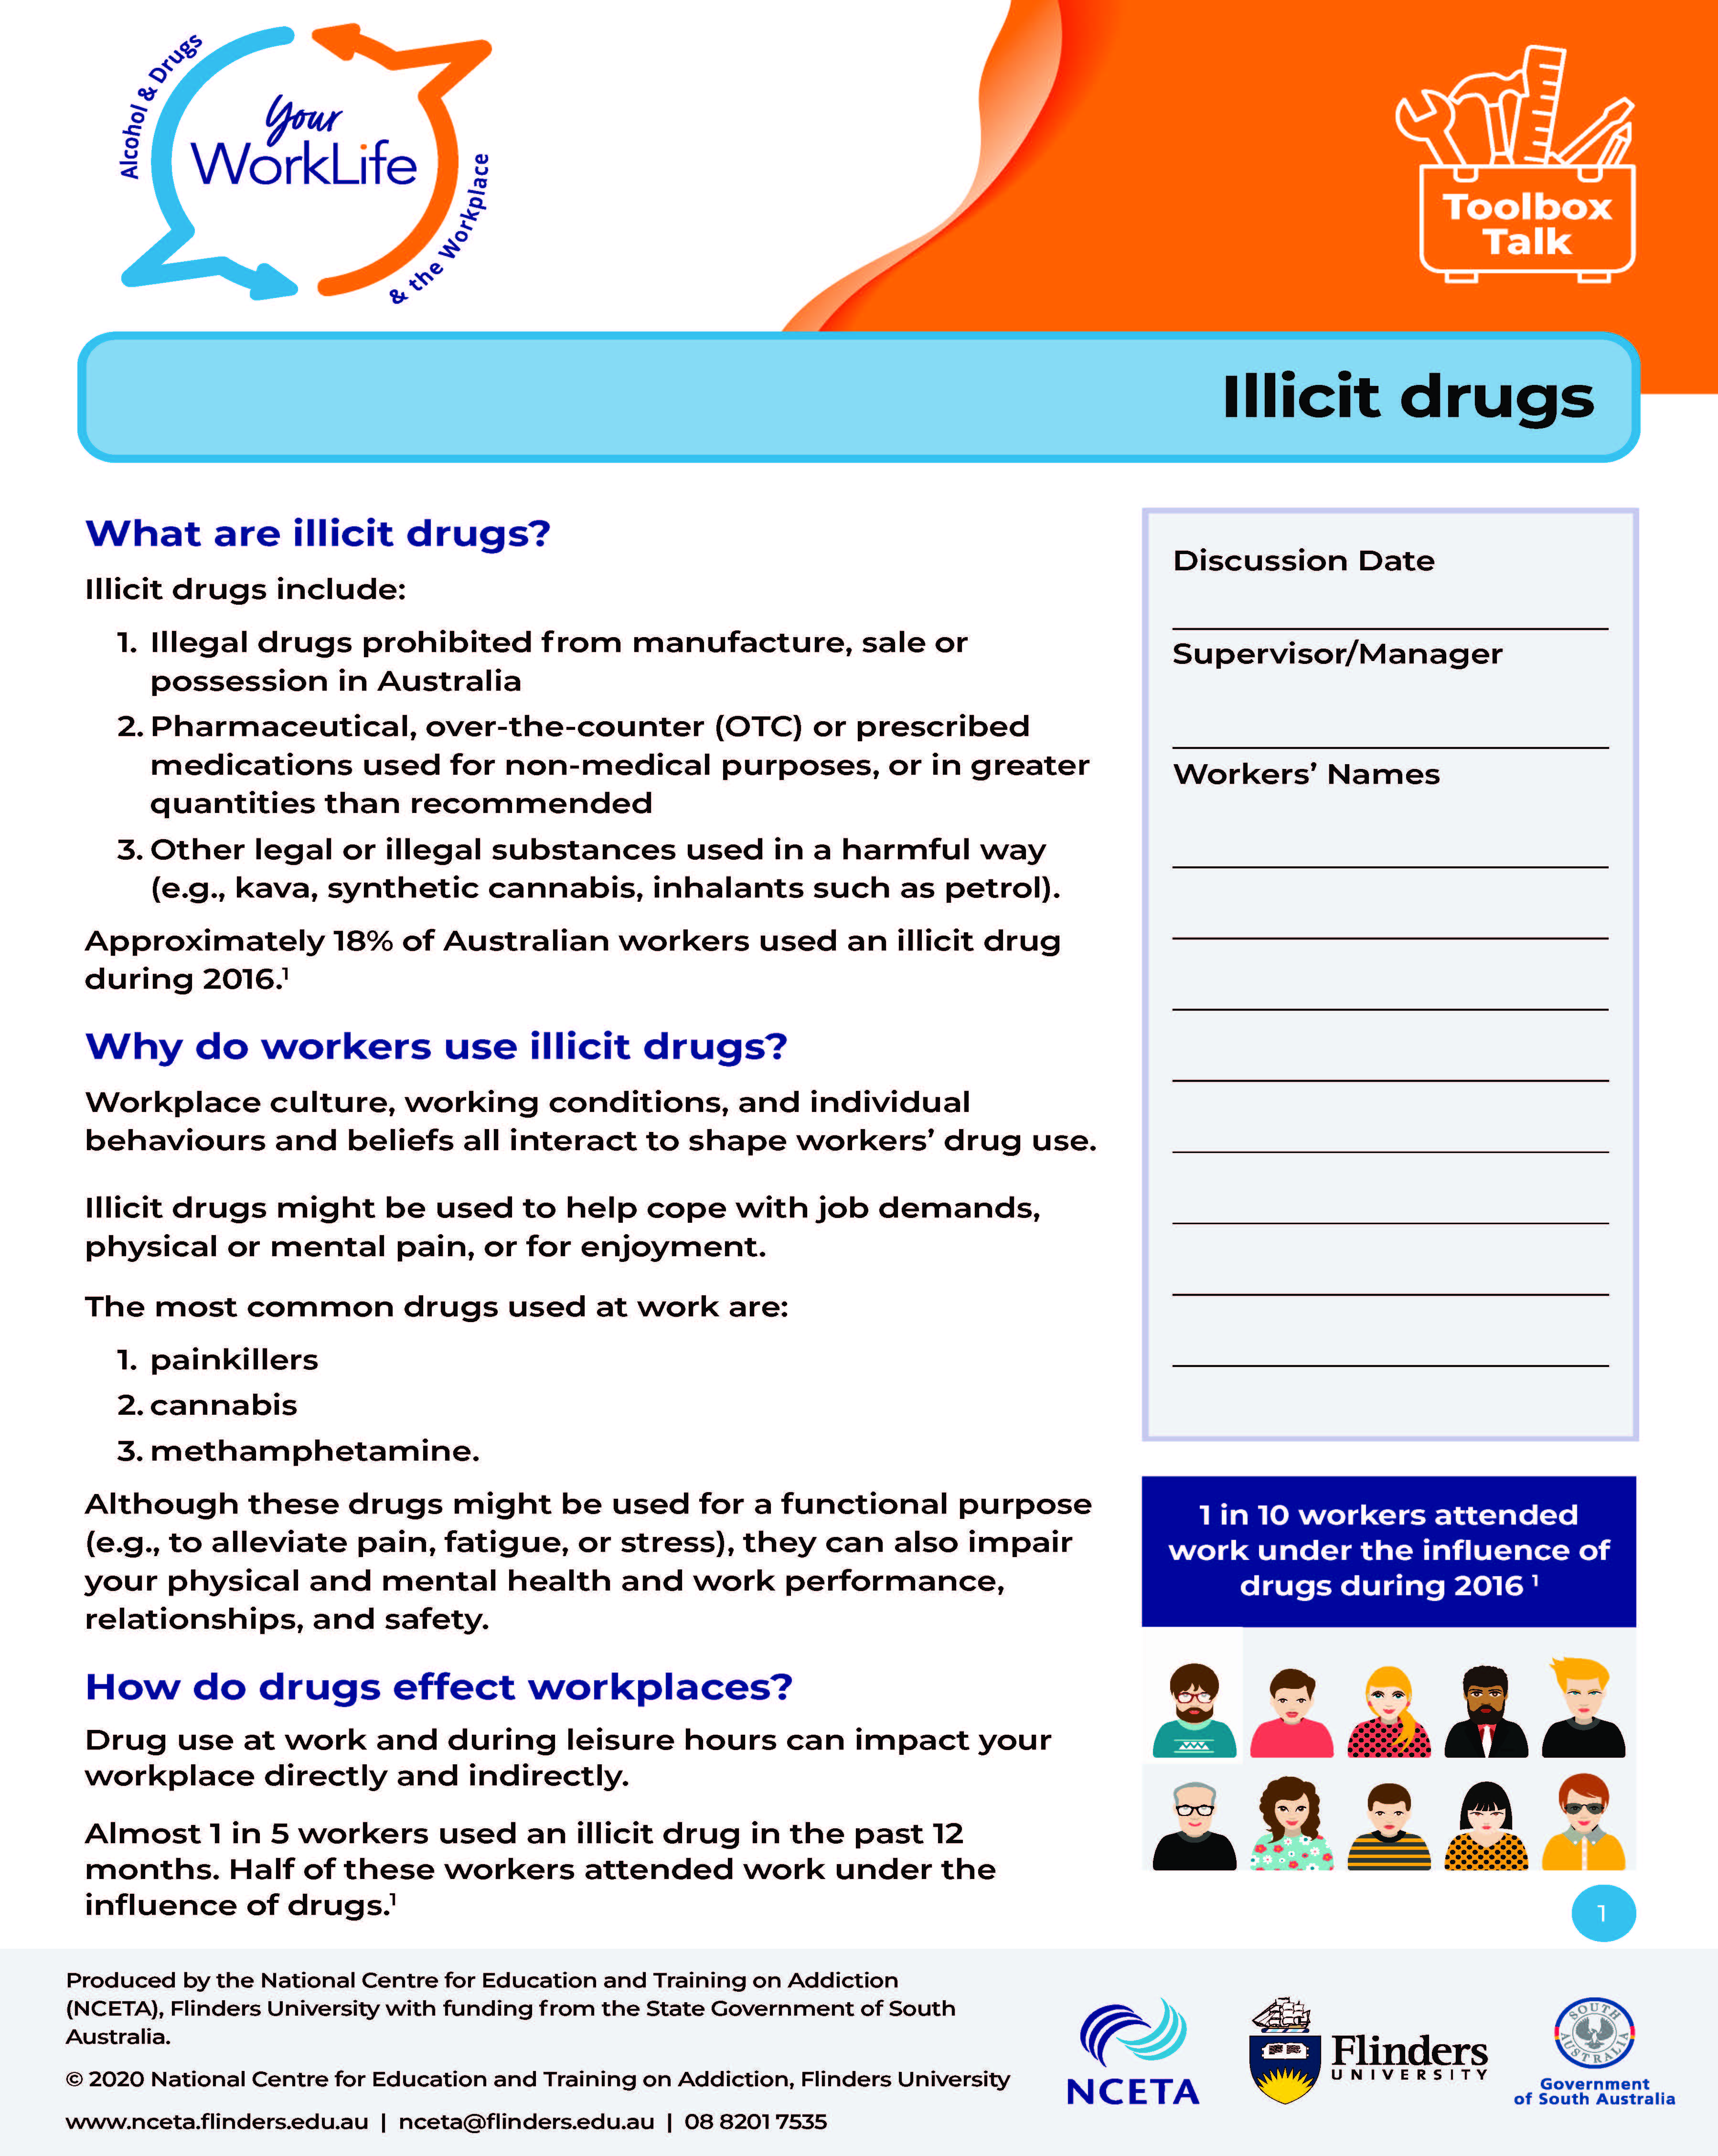 Front page-Toolbox-topic-illicit-drugs 20200505.jpg